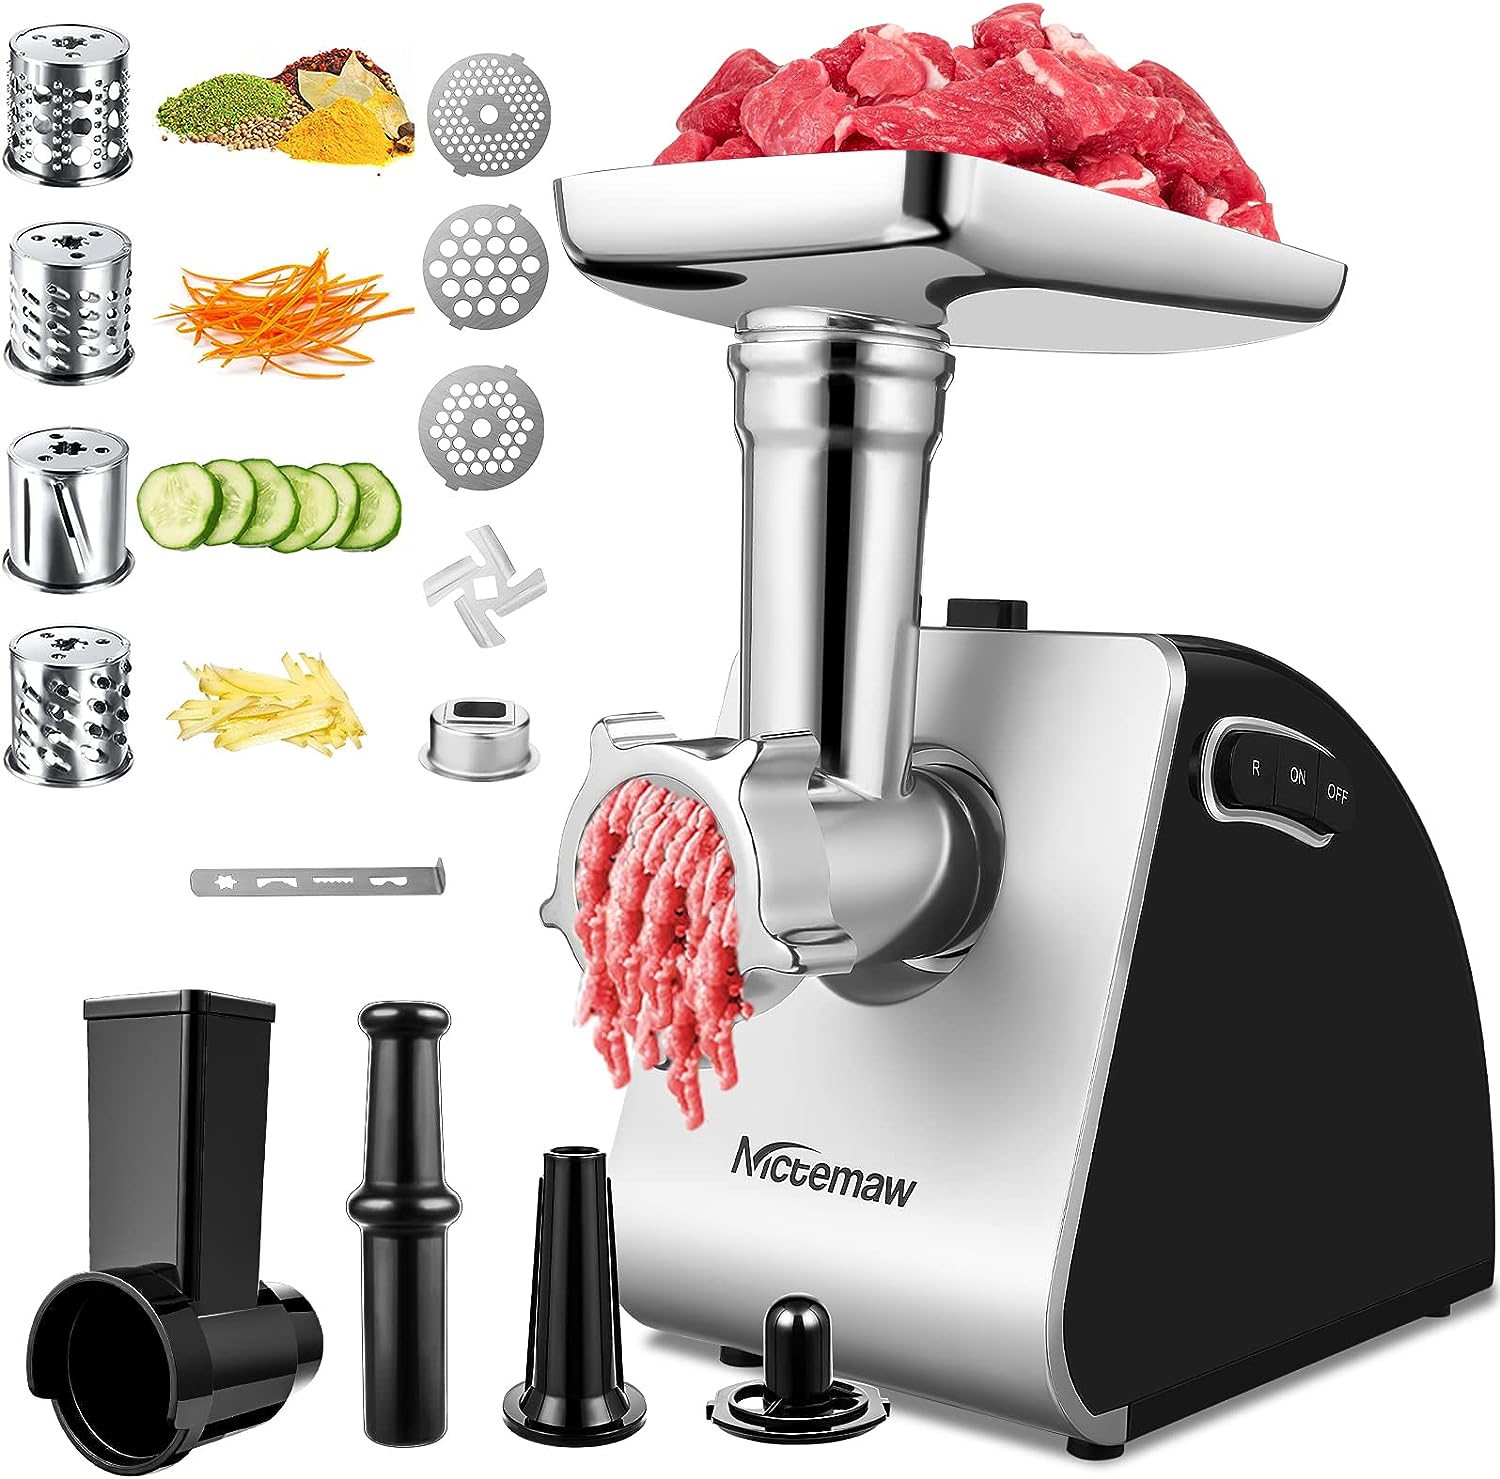 Nictemaw Meat Grinder Electric 2000 W, Sausage Machine and Food Processor in One, with 3 Hole Discs, 4 Cone Blades and Sausage Filler - Ideal for Making Sausage and Minced Meat